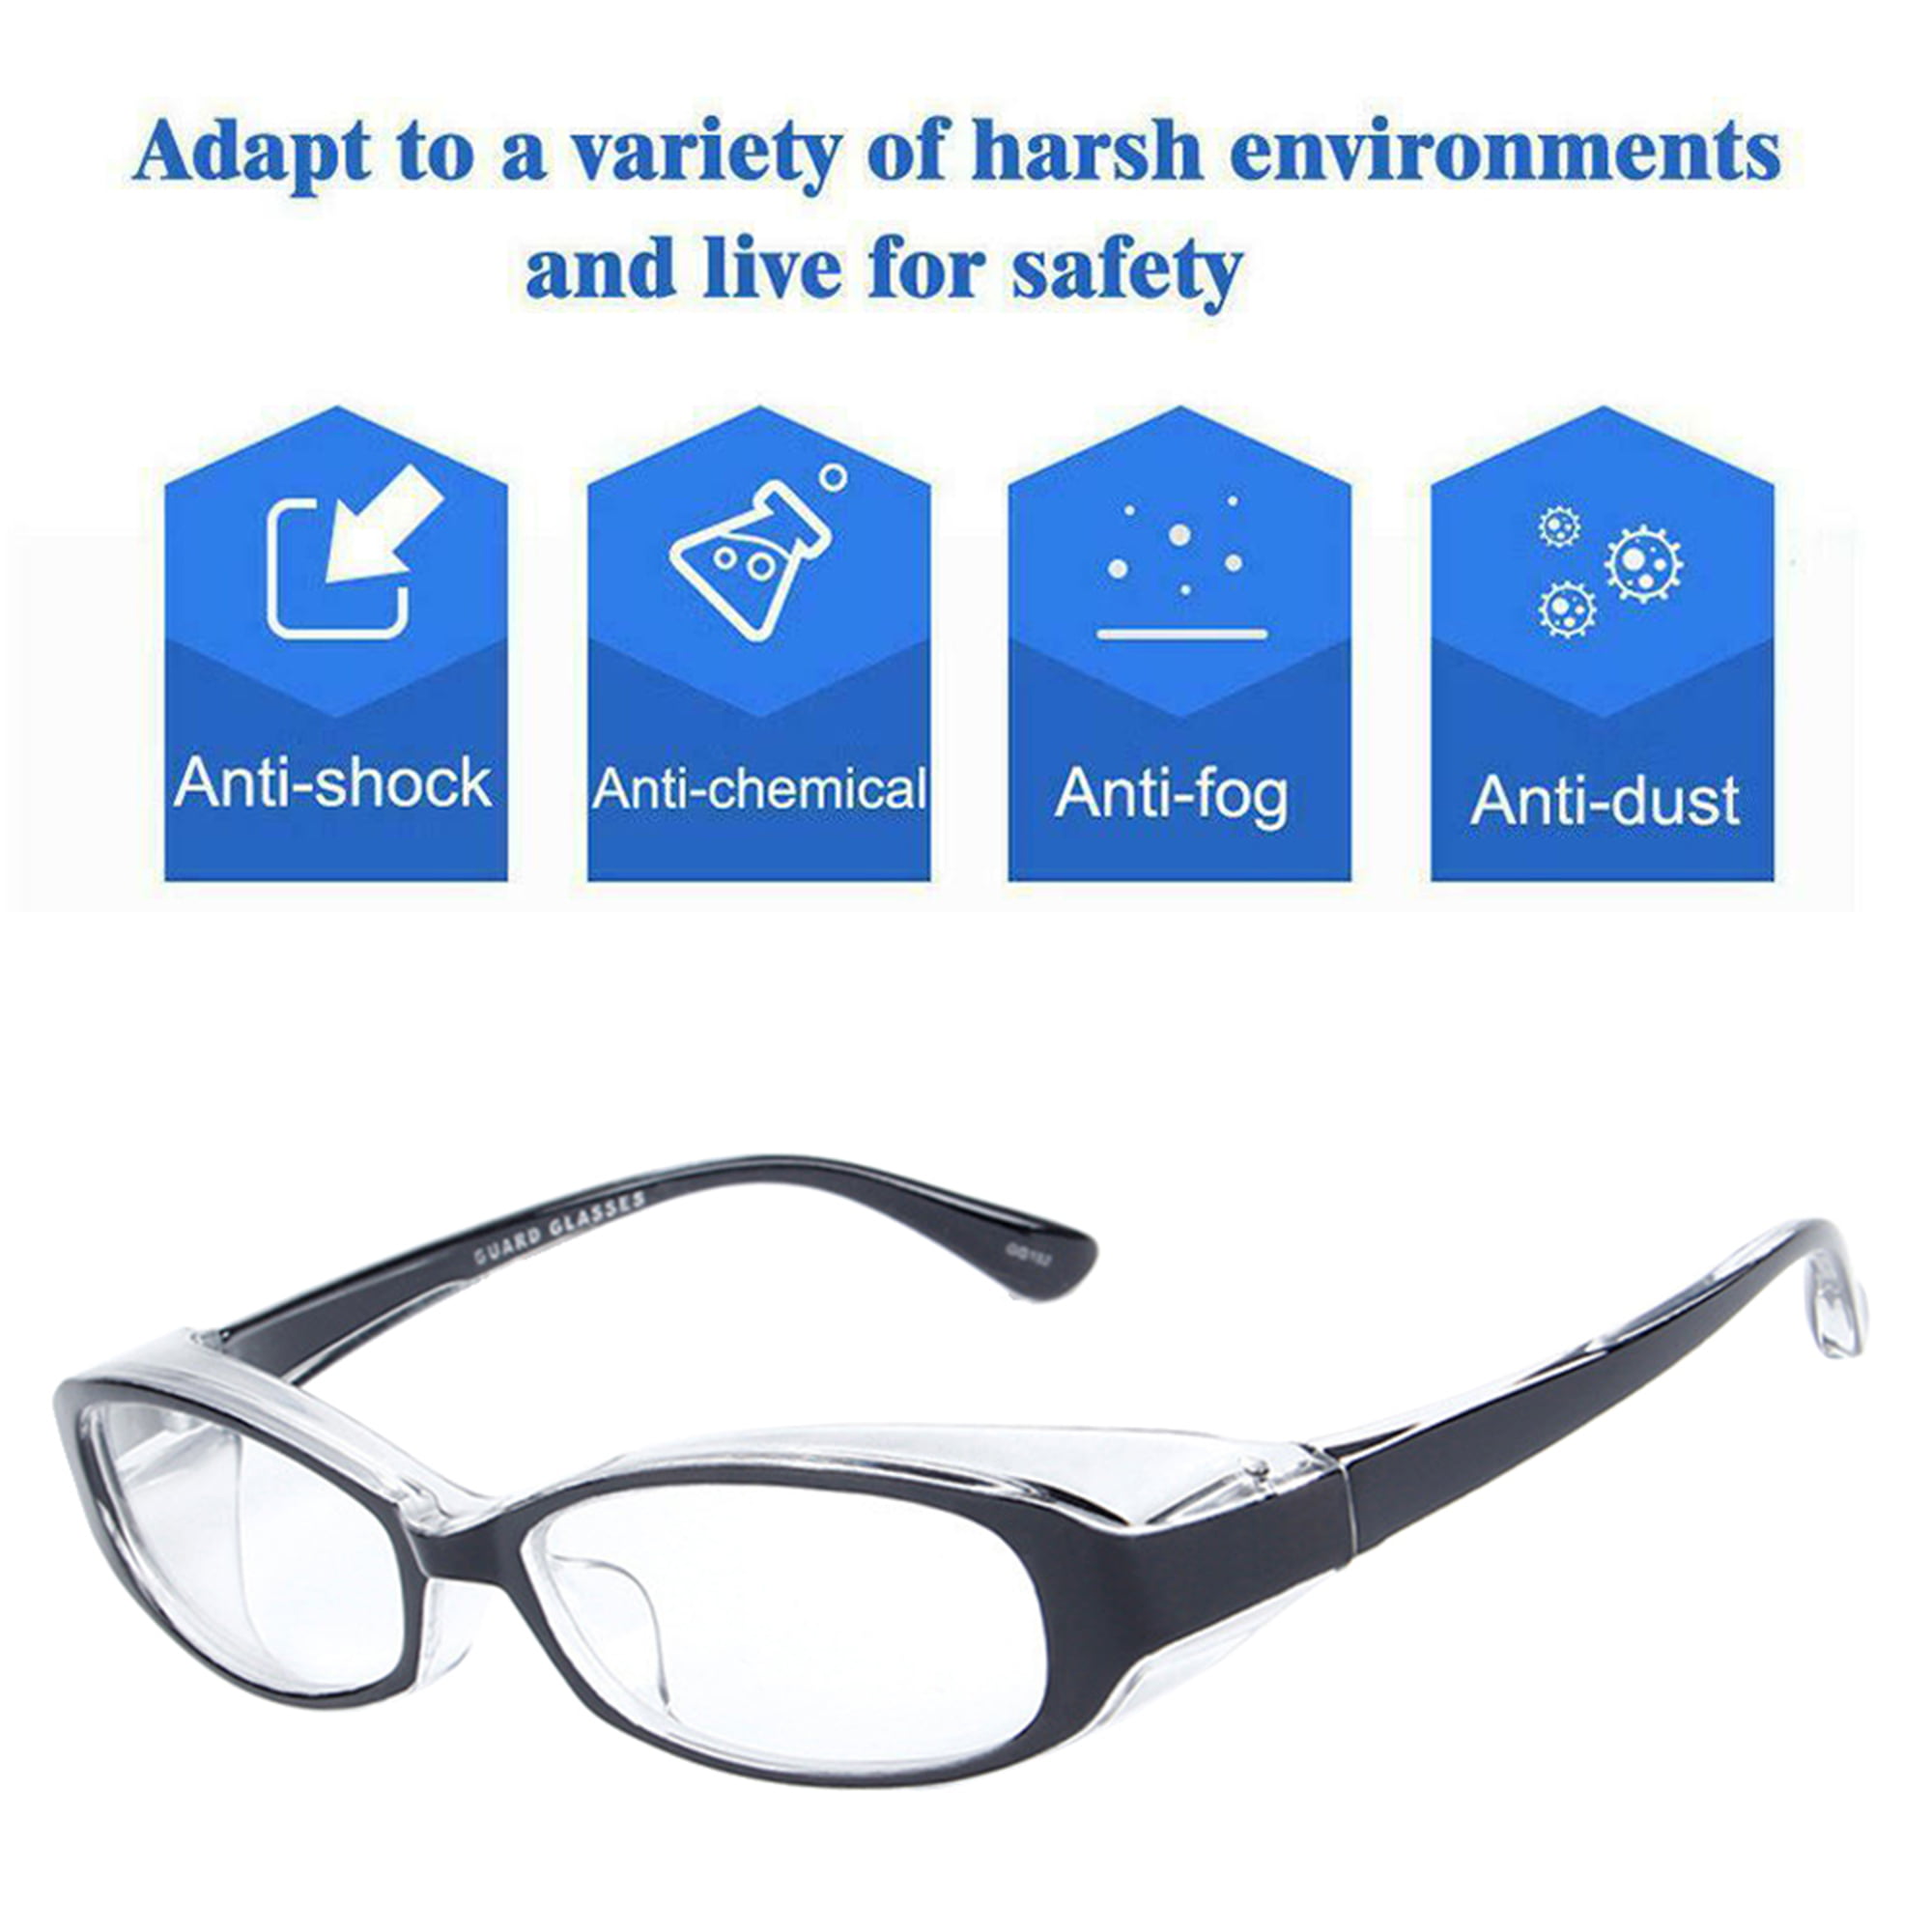 Cyxus Safety Goggles Protective Glasses for Kids Eye Protection Anti Fog Goggles Waterproof Windproof Clear Lens Soft Adjustable Strap 6003,crystal